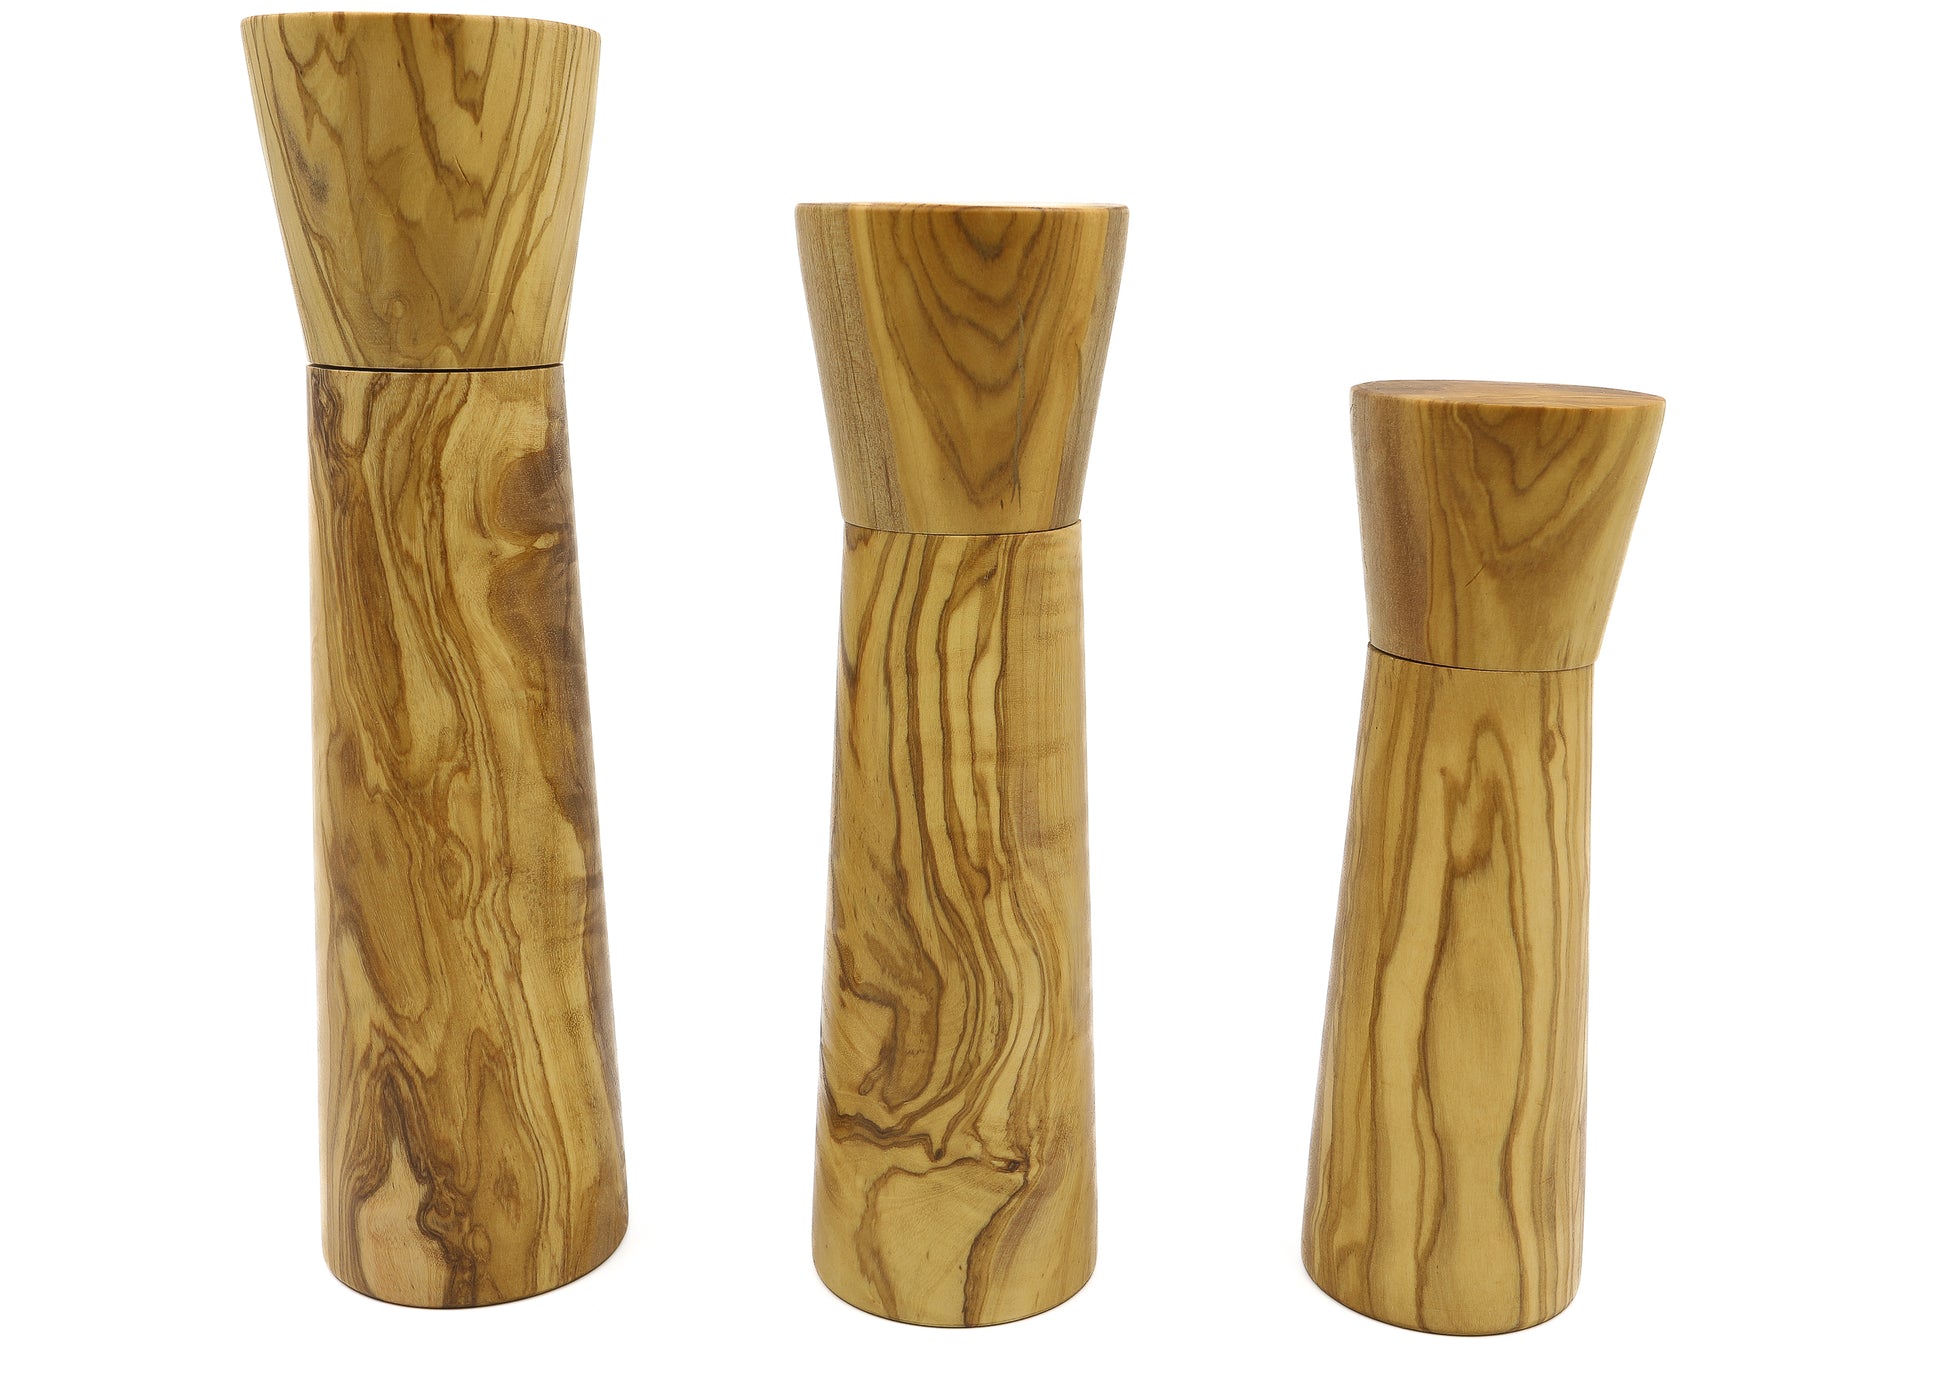 Crafted Olive Wood Salt and Pepper Mills with Ceramic Grinding for Precise Seasoning